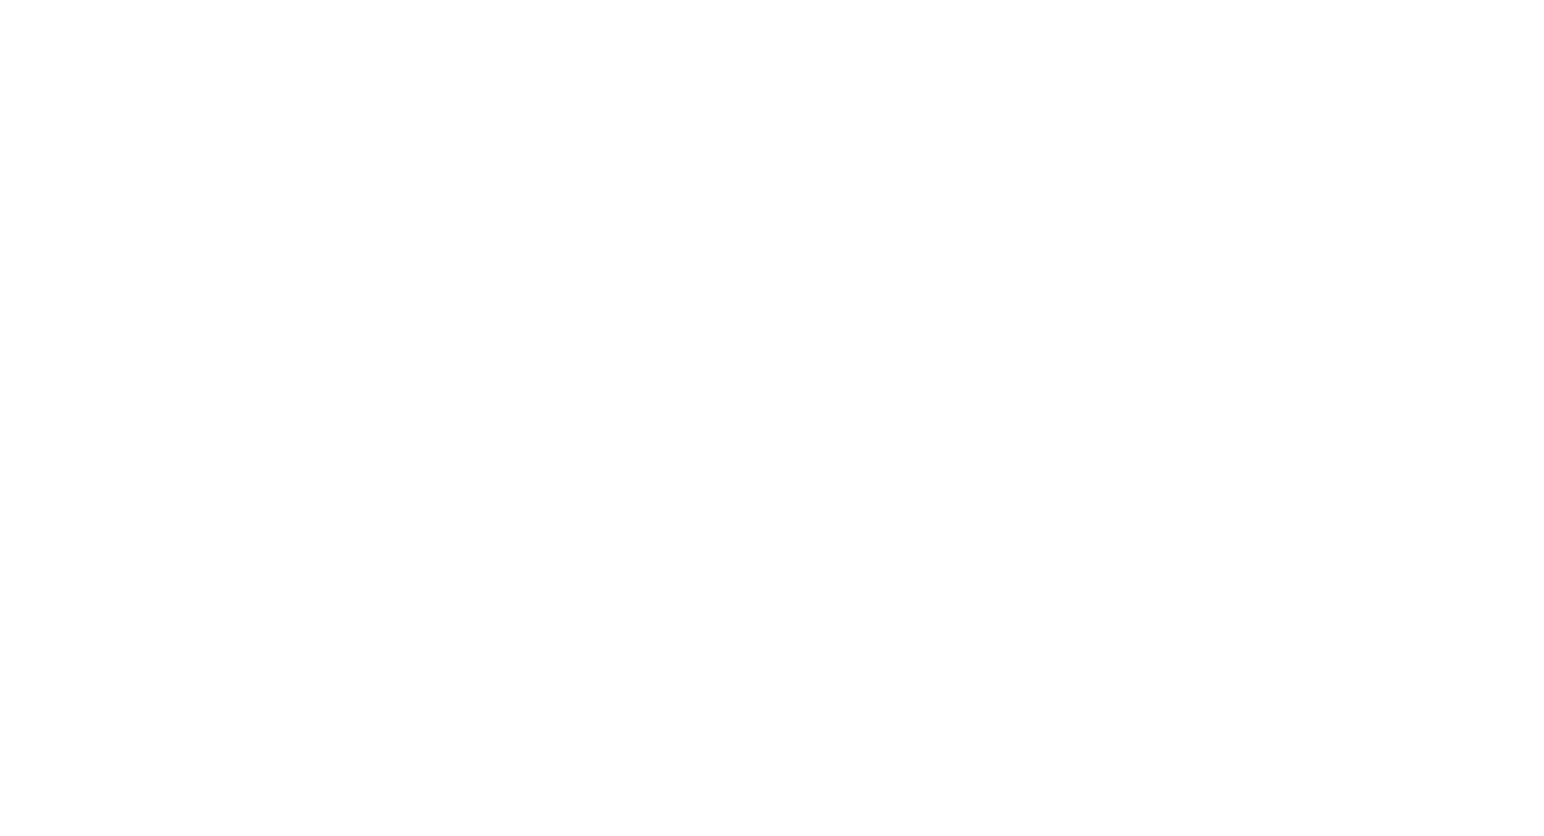 Cavco Industries logo large for dark backgrounds (transparent PNG)